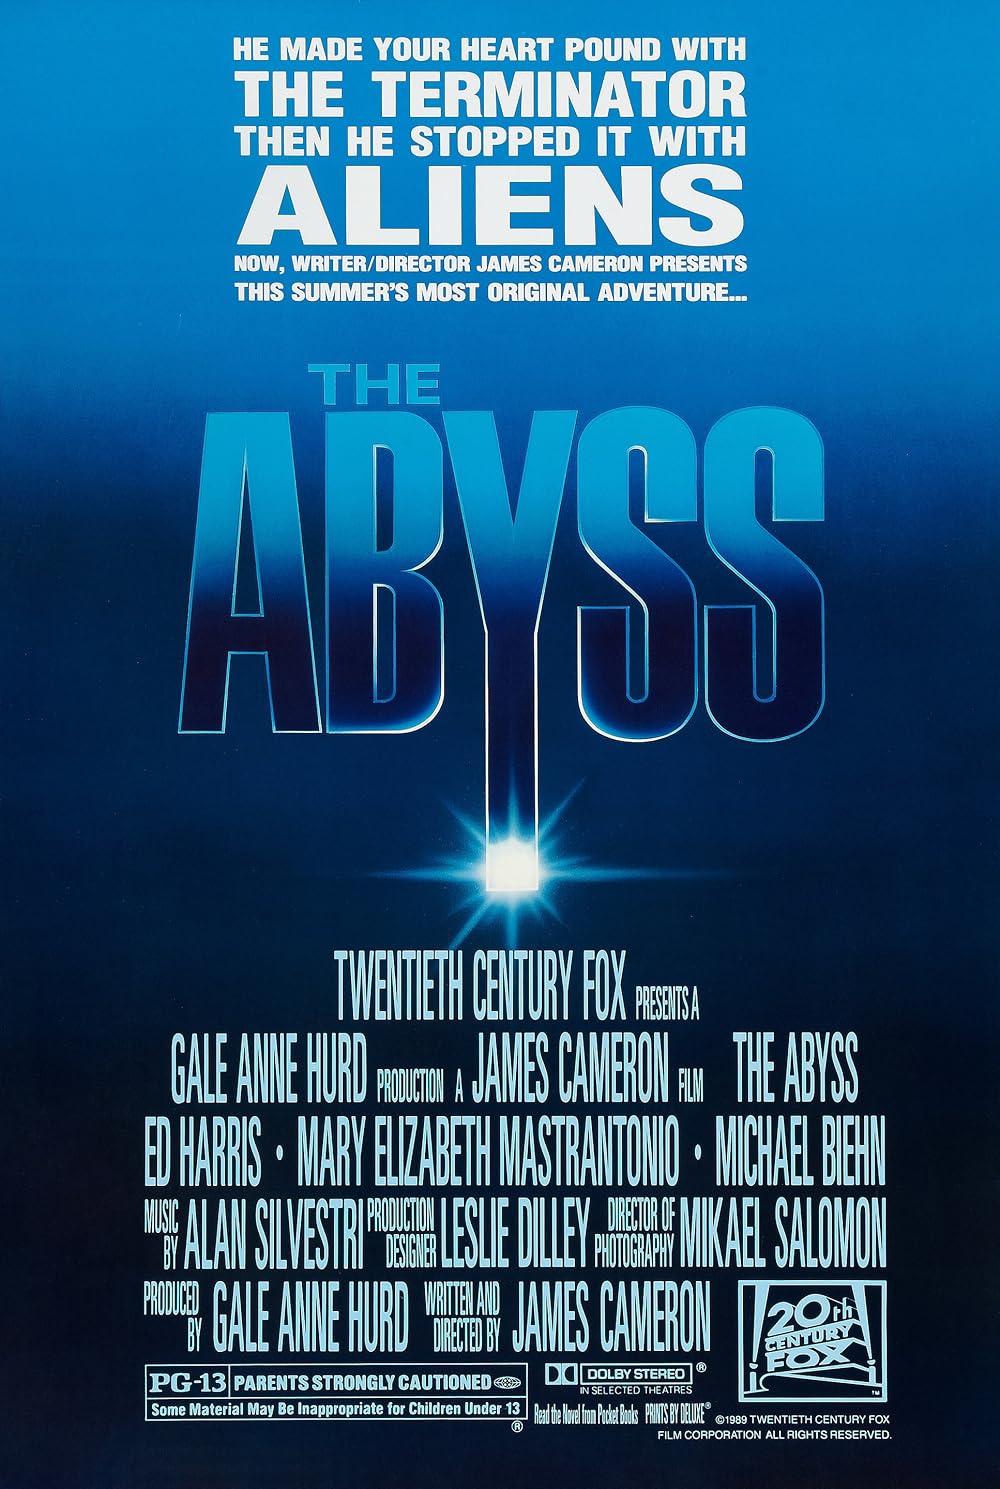 THE ABYSS (Special Edition) 35th Anniversary